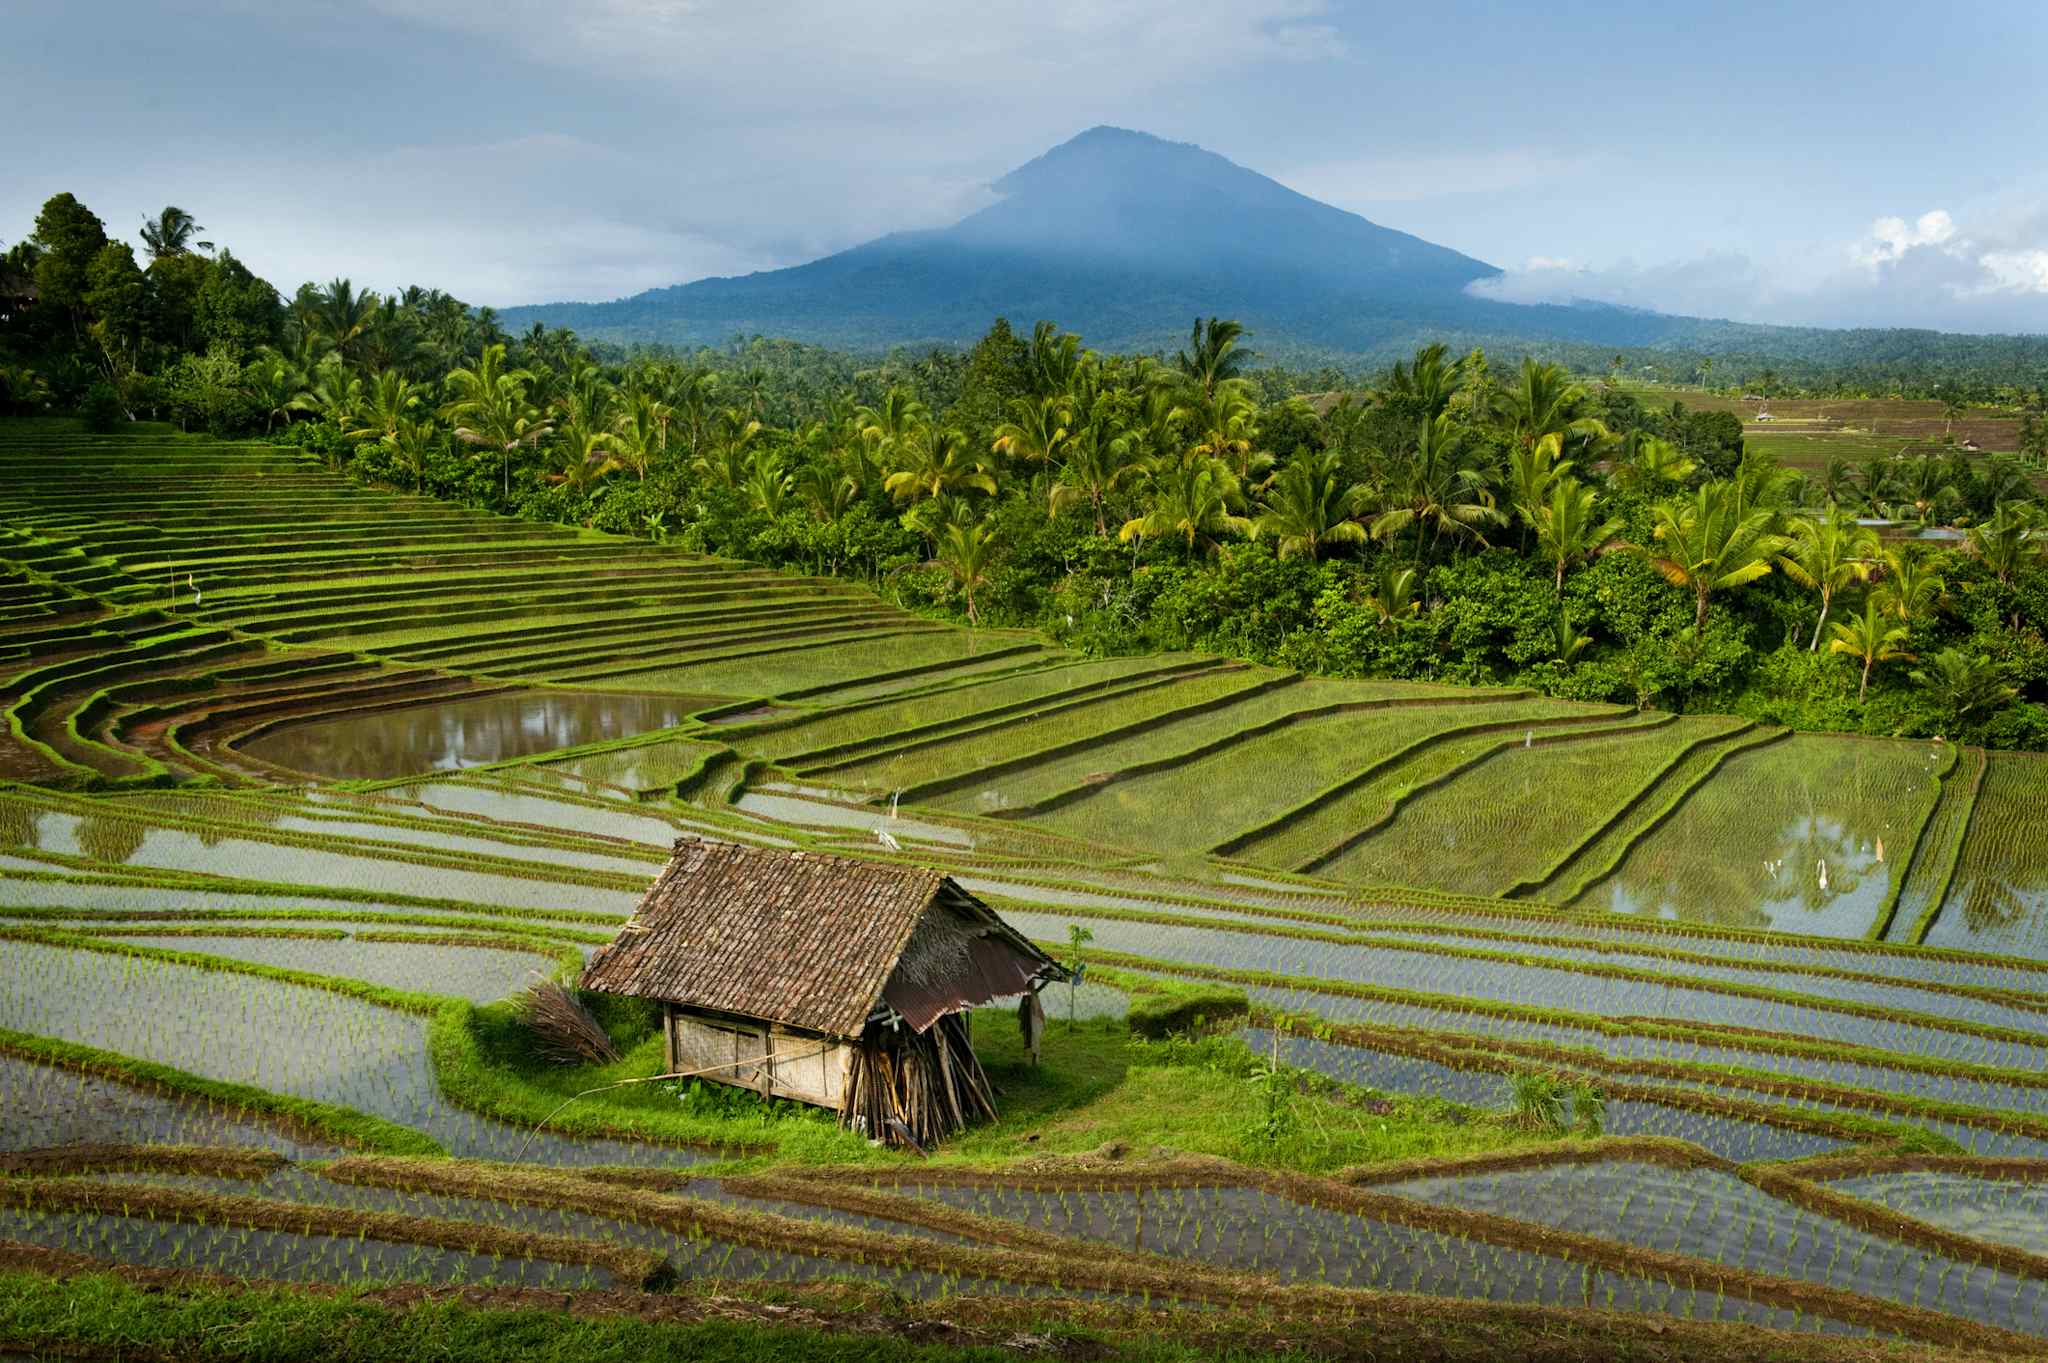 The spectacular rice terraces of Belimbing, Bali with Batukaru in the background
